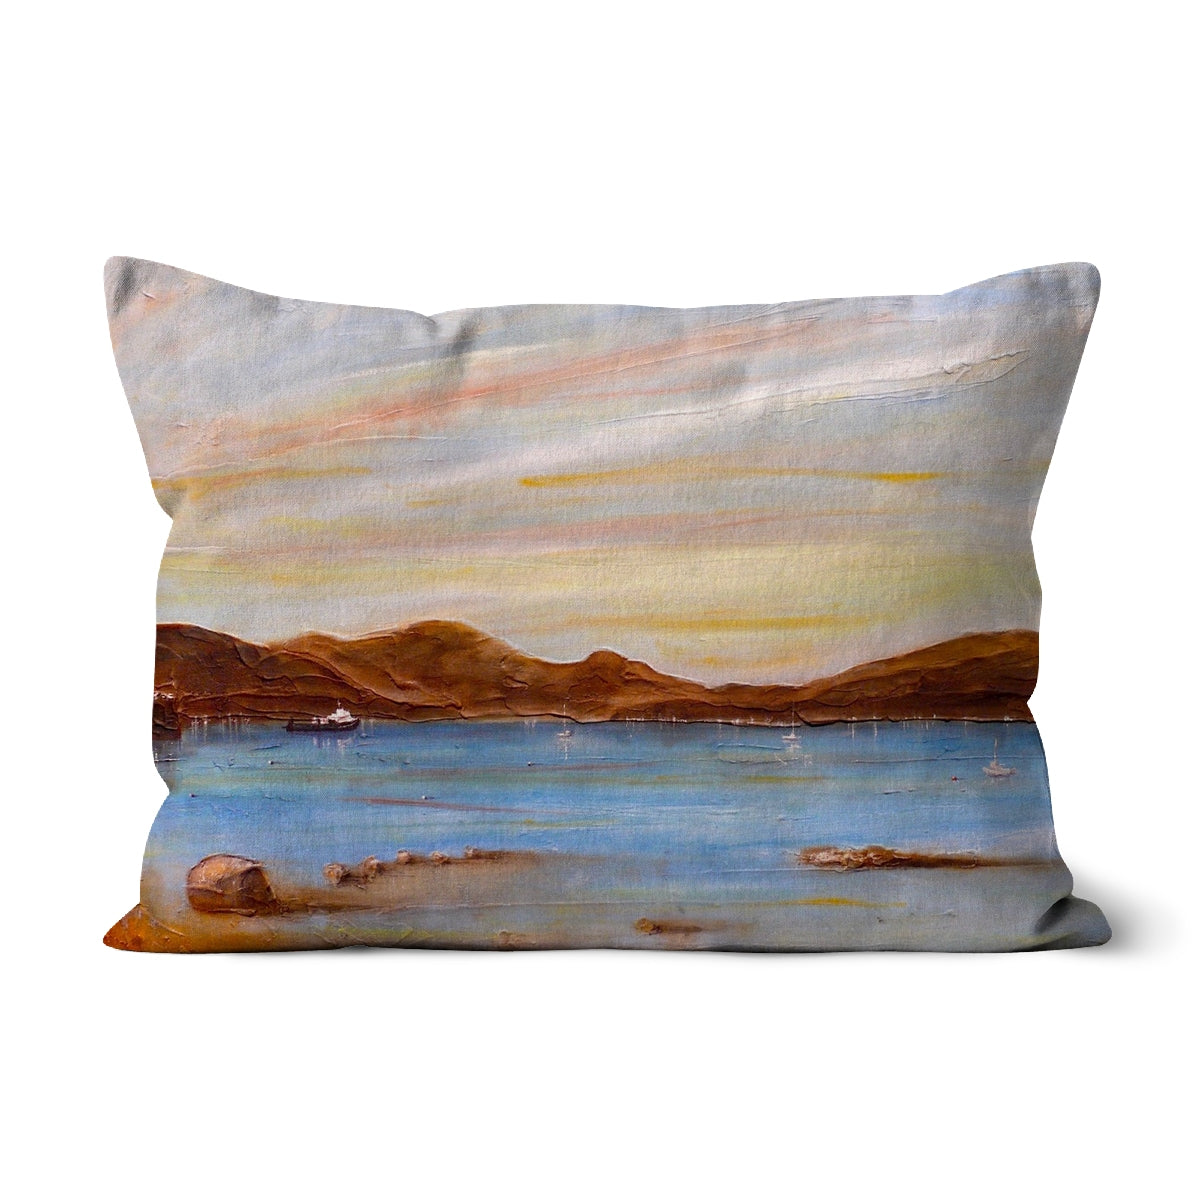 The Last Ferry To Dunoon Art Gifts Cushion-Cushions-River Clyde Art Gallery-Linen-19"x13"-Paintings, Prints, Homeware, Art Gifts From Scotland By Scottish Artist Kevin Hunter